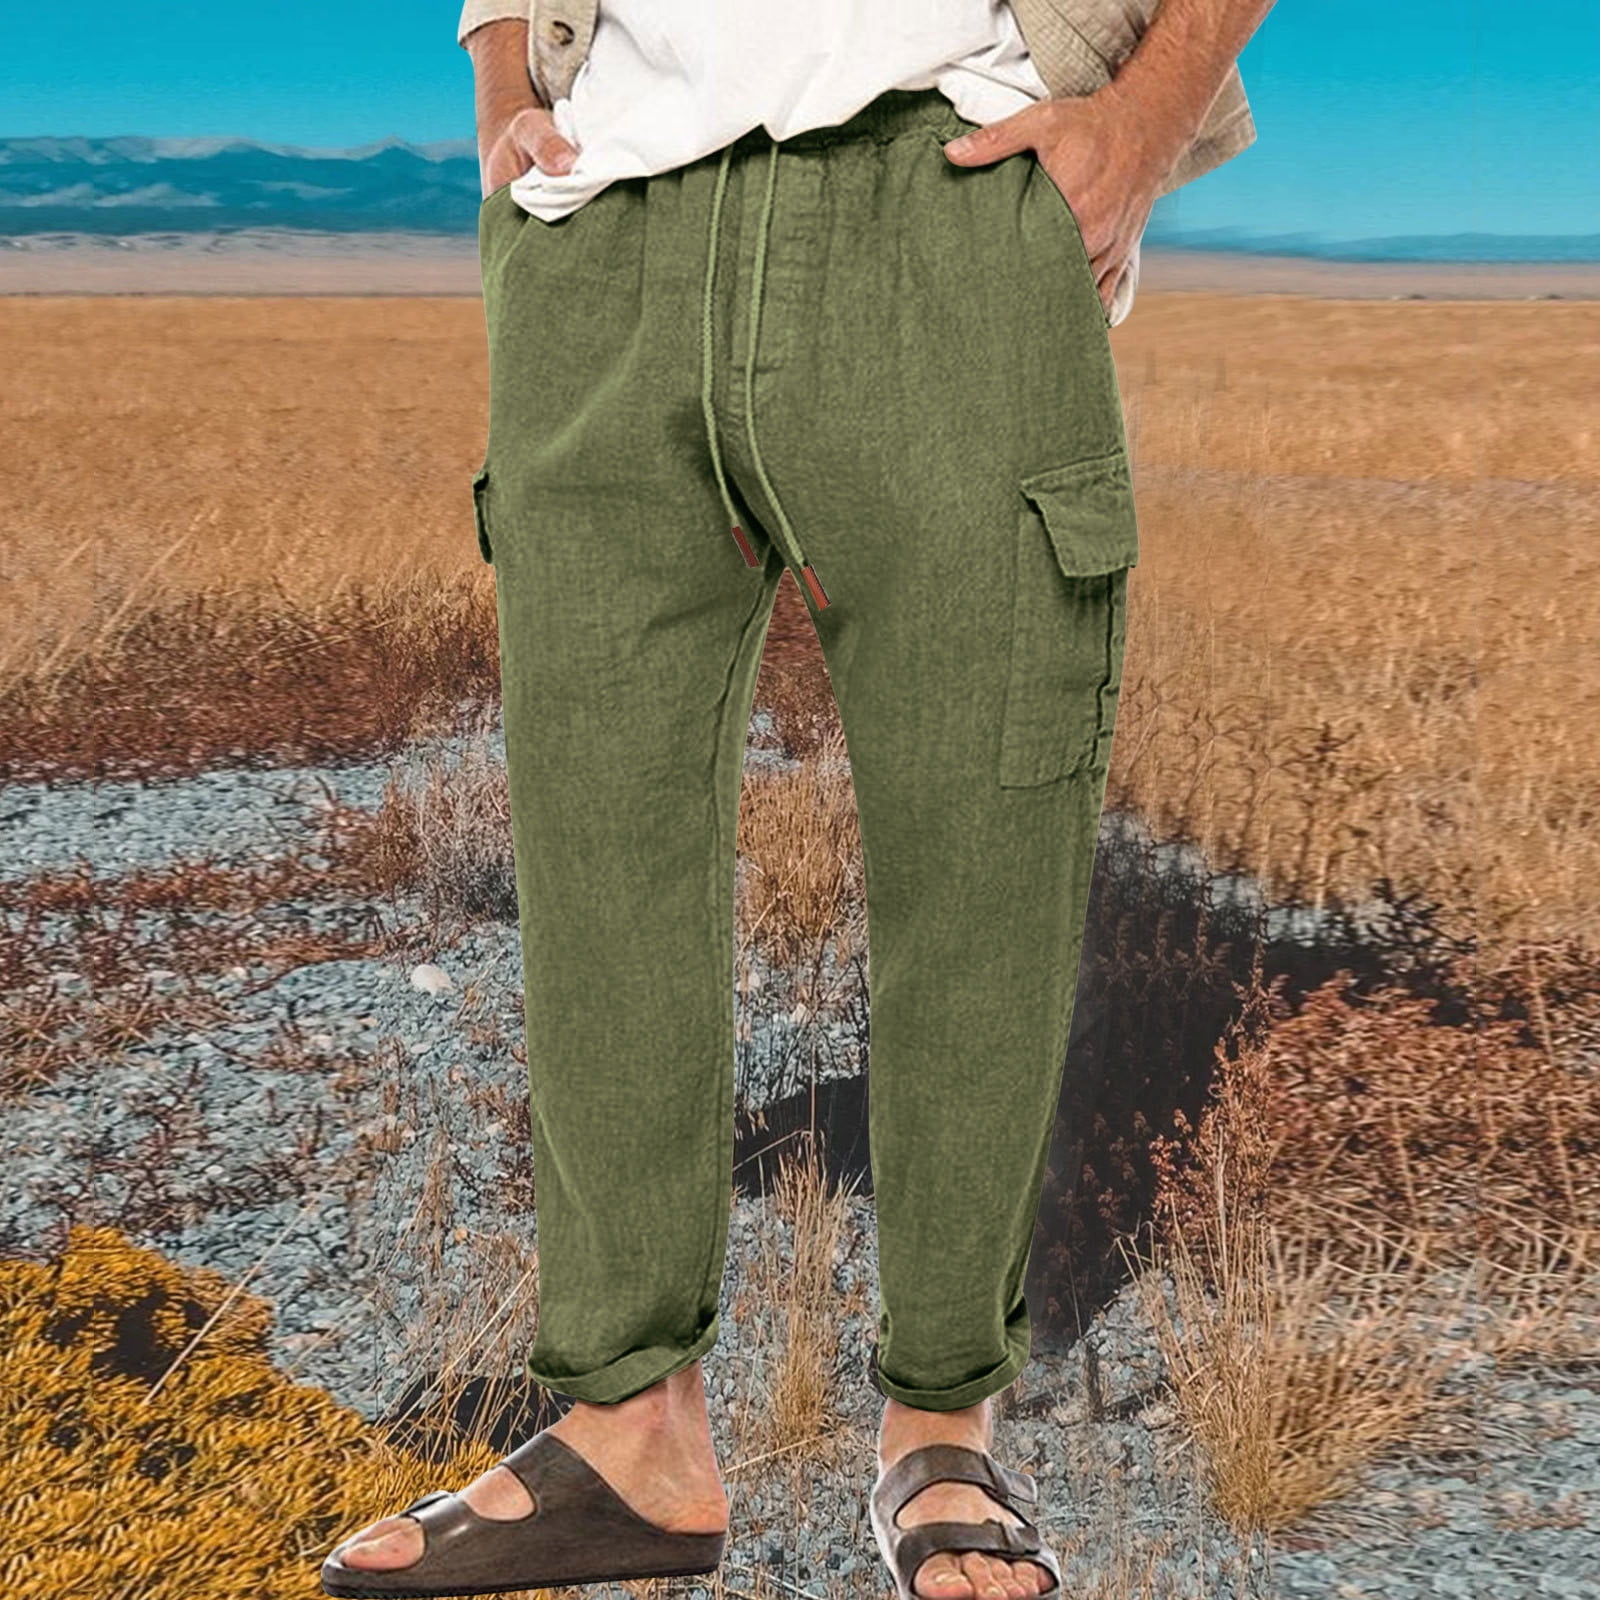 Olive Green Cotton Pants : Made To Measure Custom Jeans For Men & Women,  MakeYourOwnJeans®